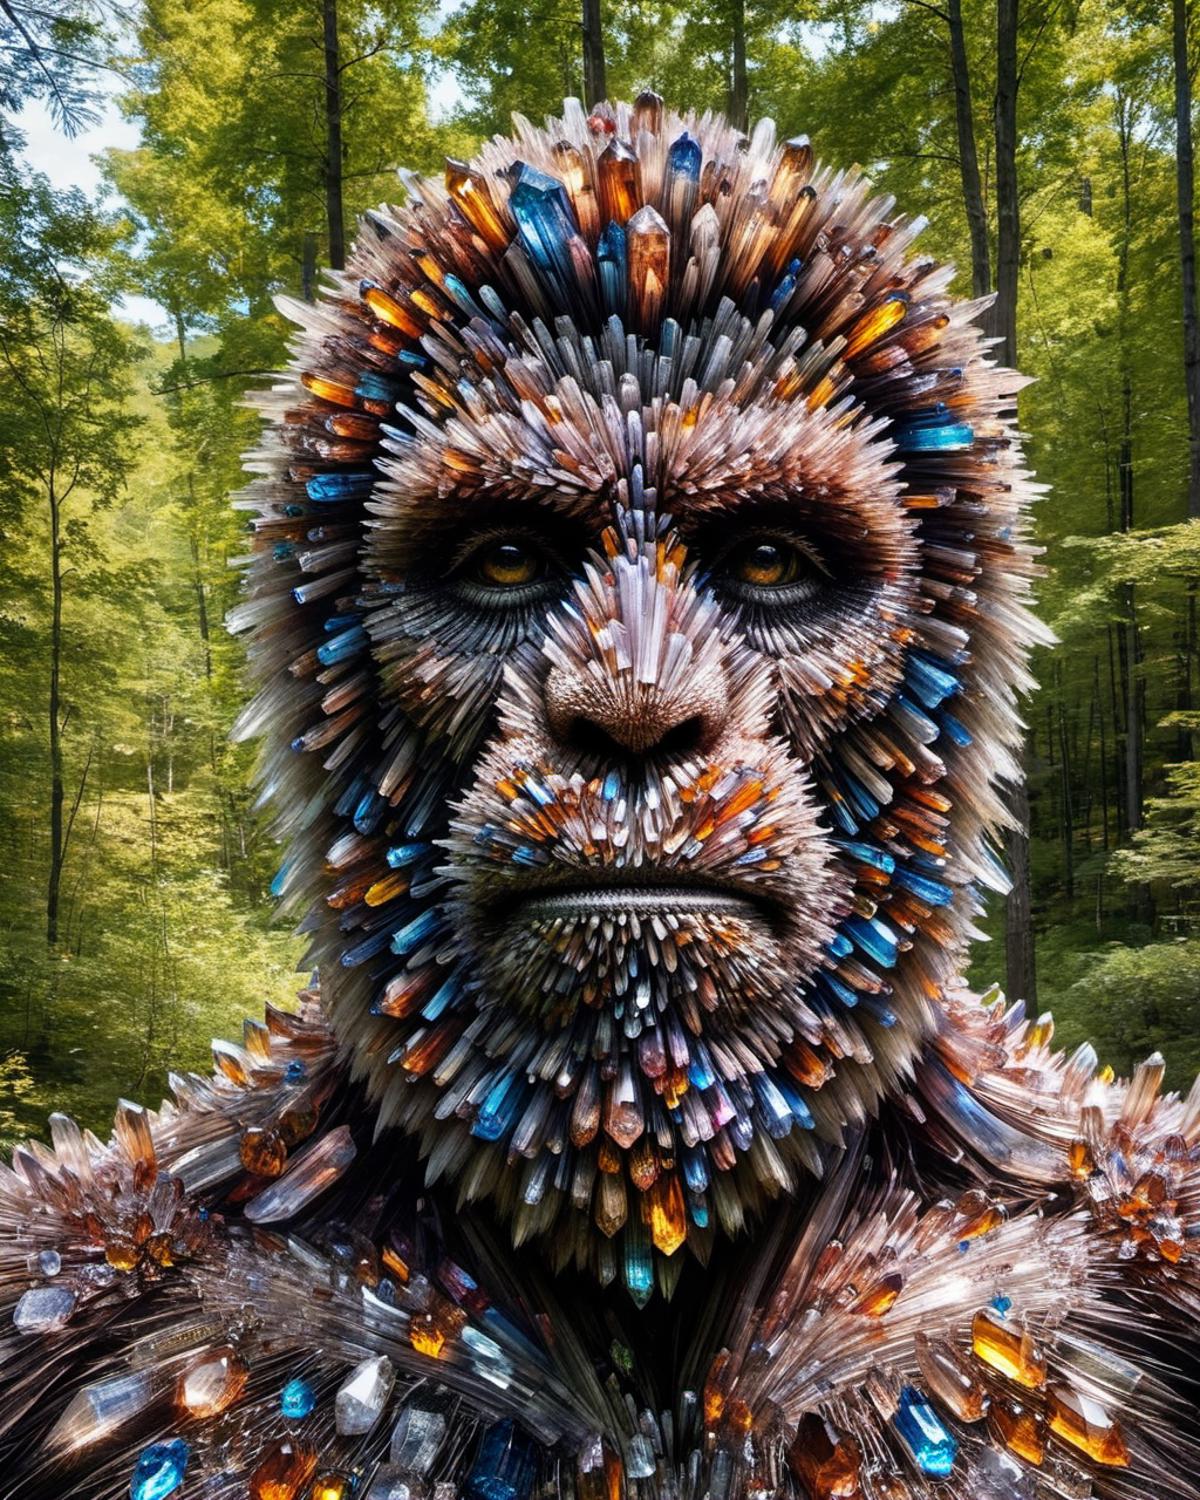 A monkey sculpture made out of soda cans in the forest.